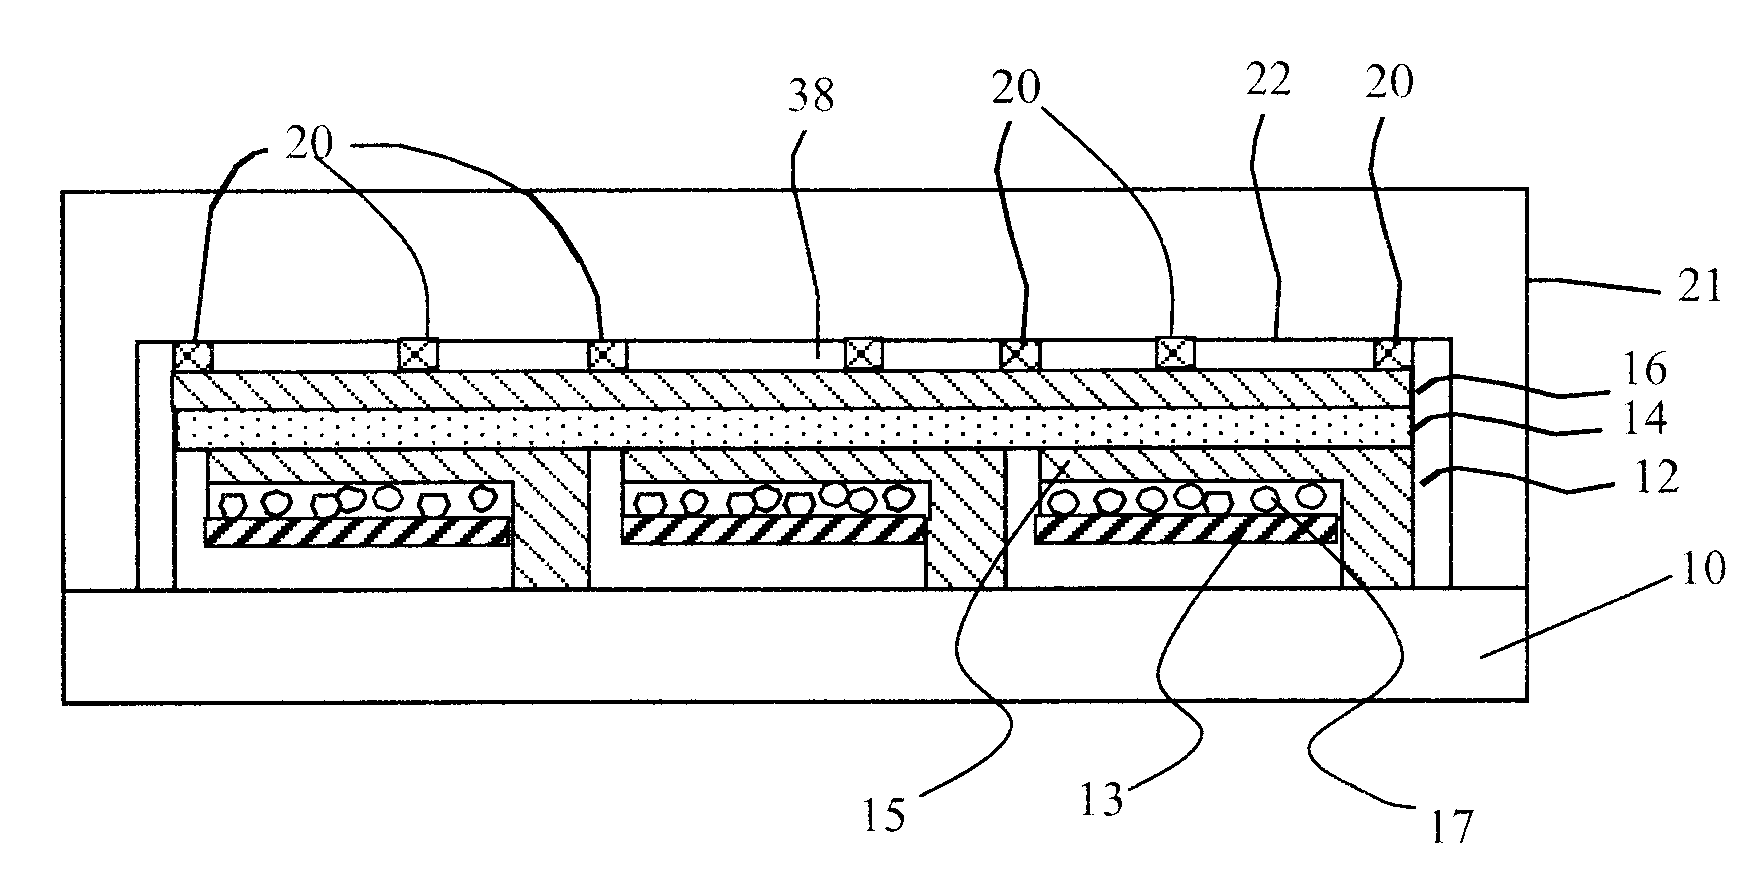 Electroluminescent device having improved power distribution